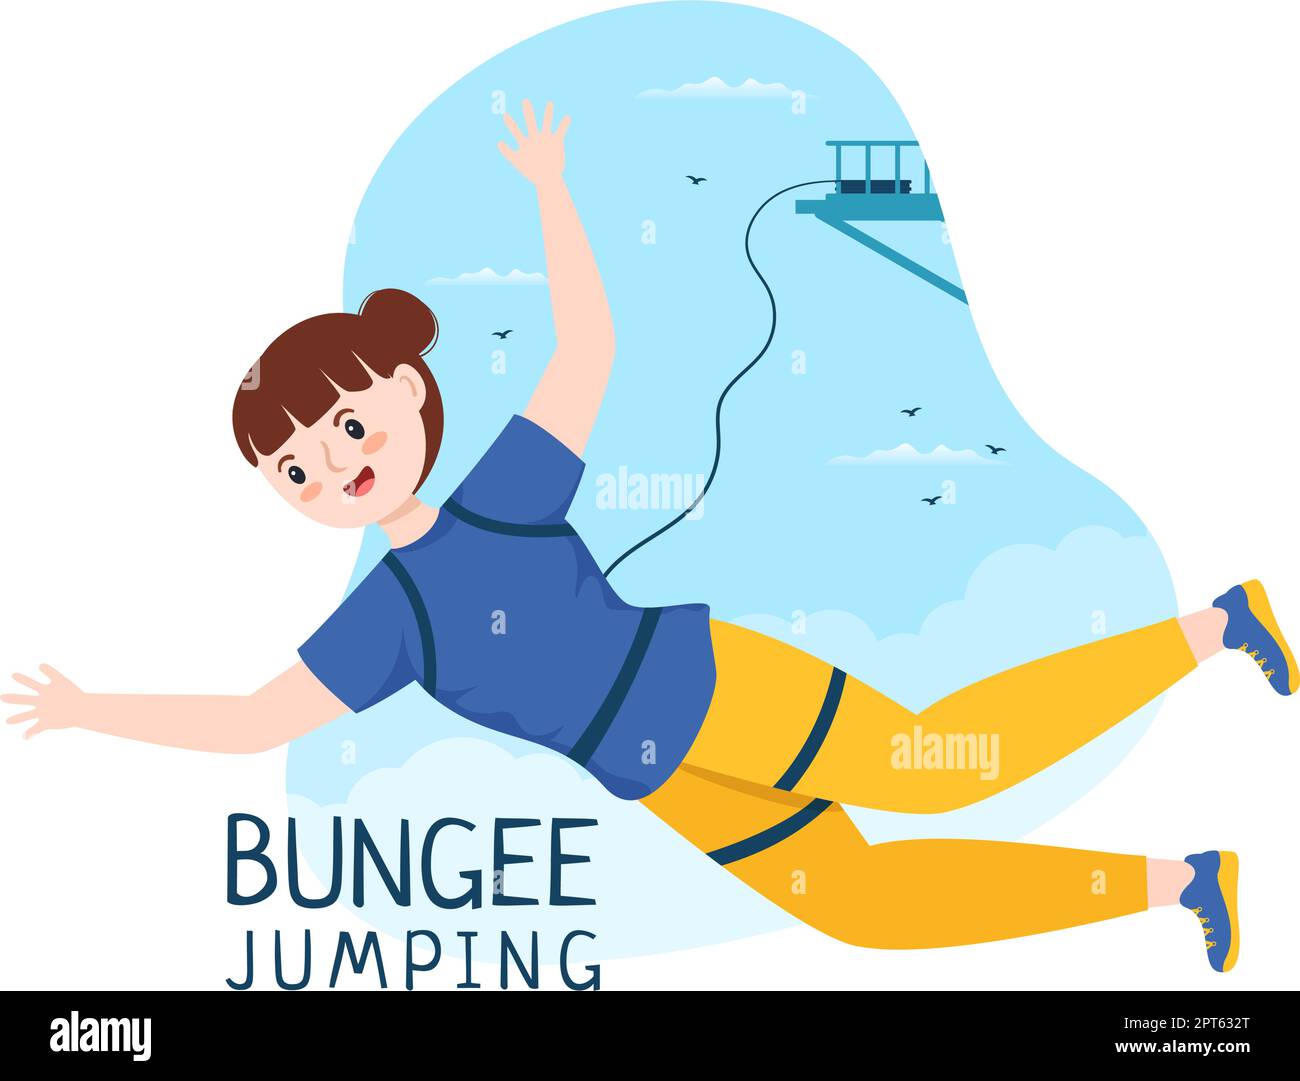 Bungee Jumping Illustration with a Person Wearing an Elastic Rope Falling Jumping From a Height in Flat Cartoon Extreme Sports Vector Template Stock Vector